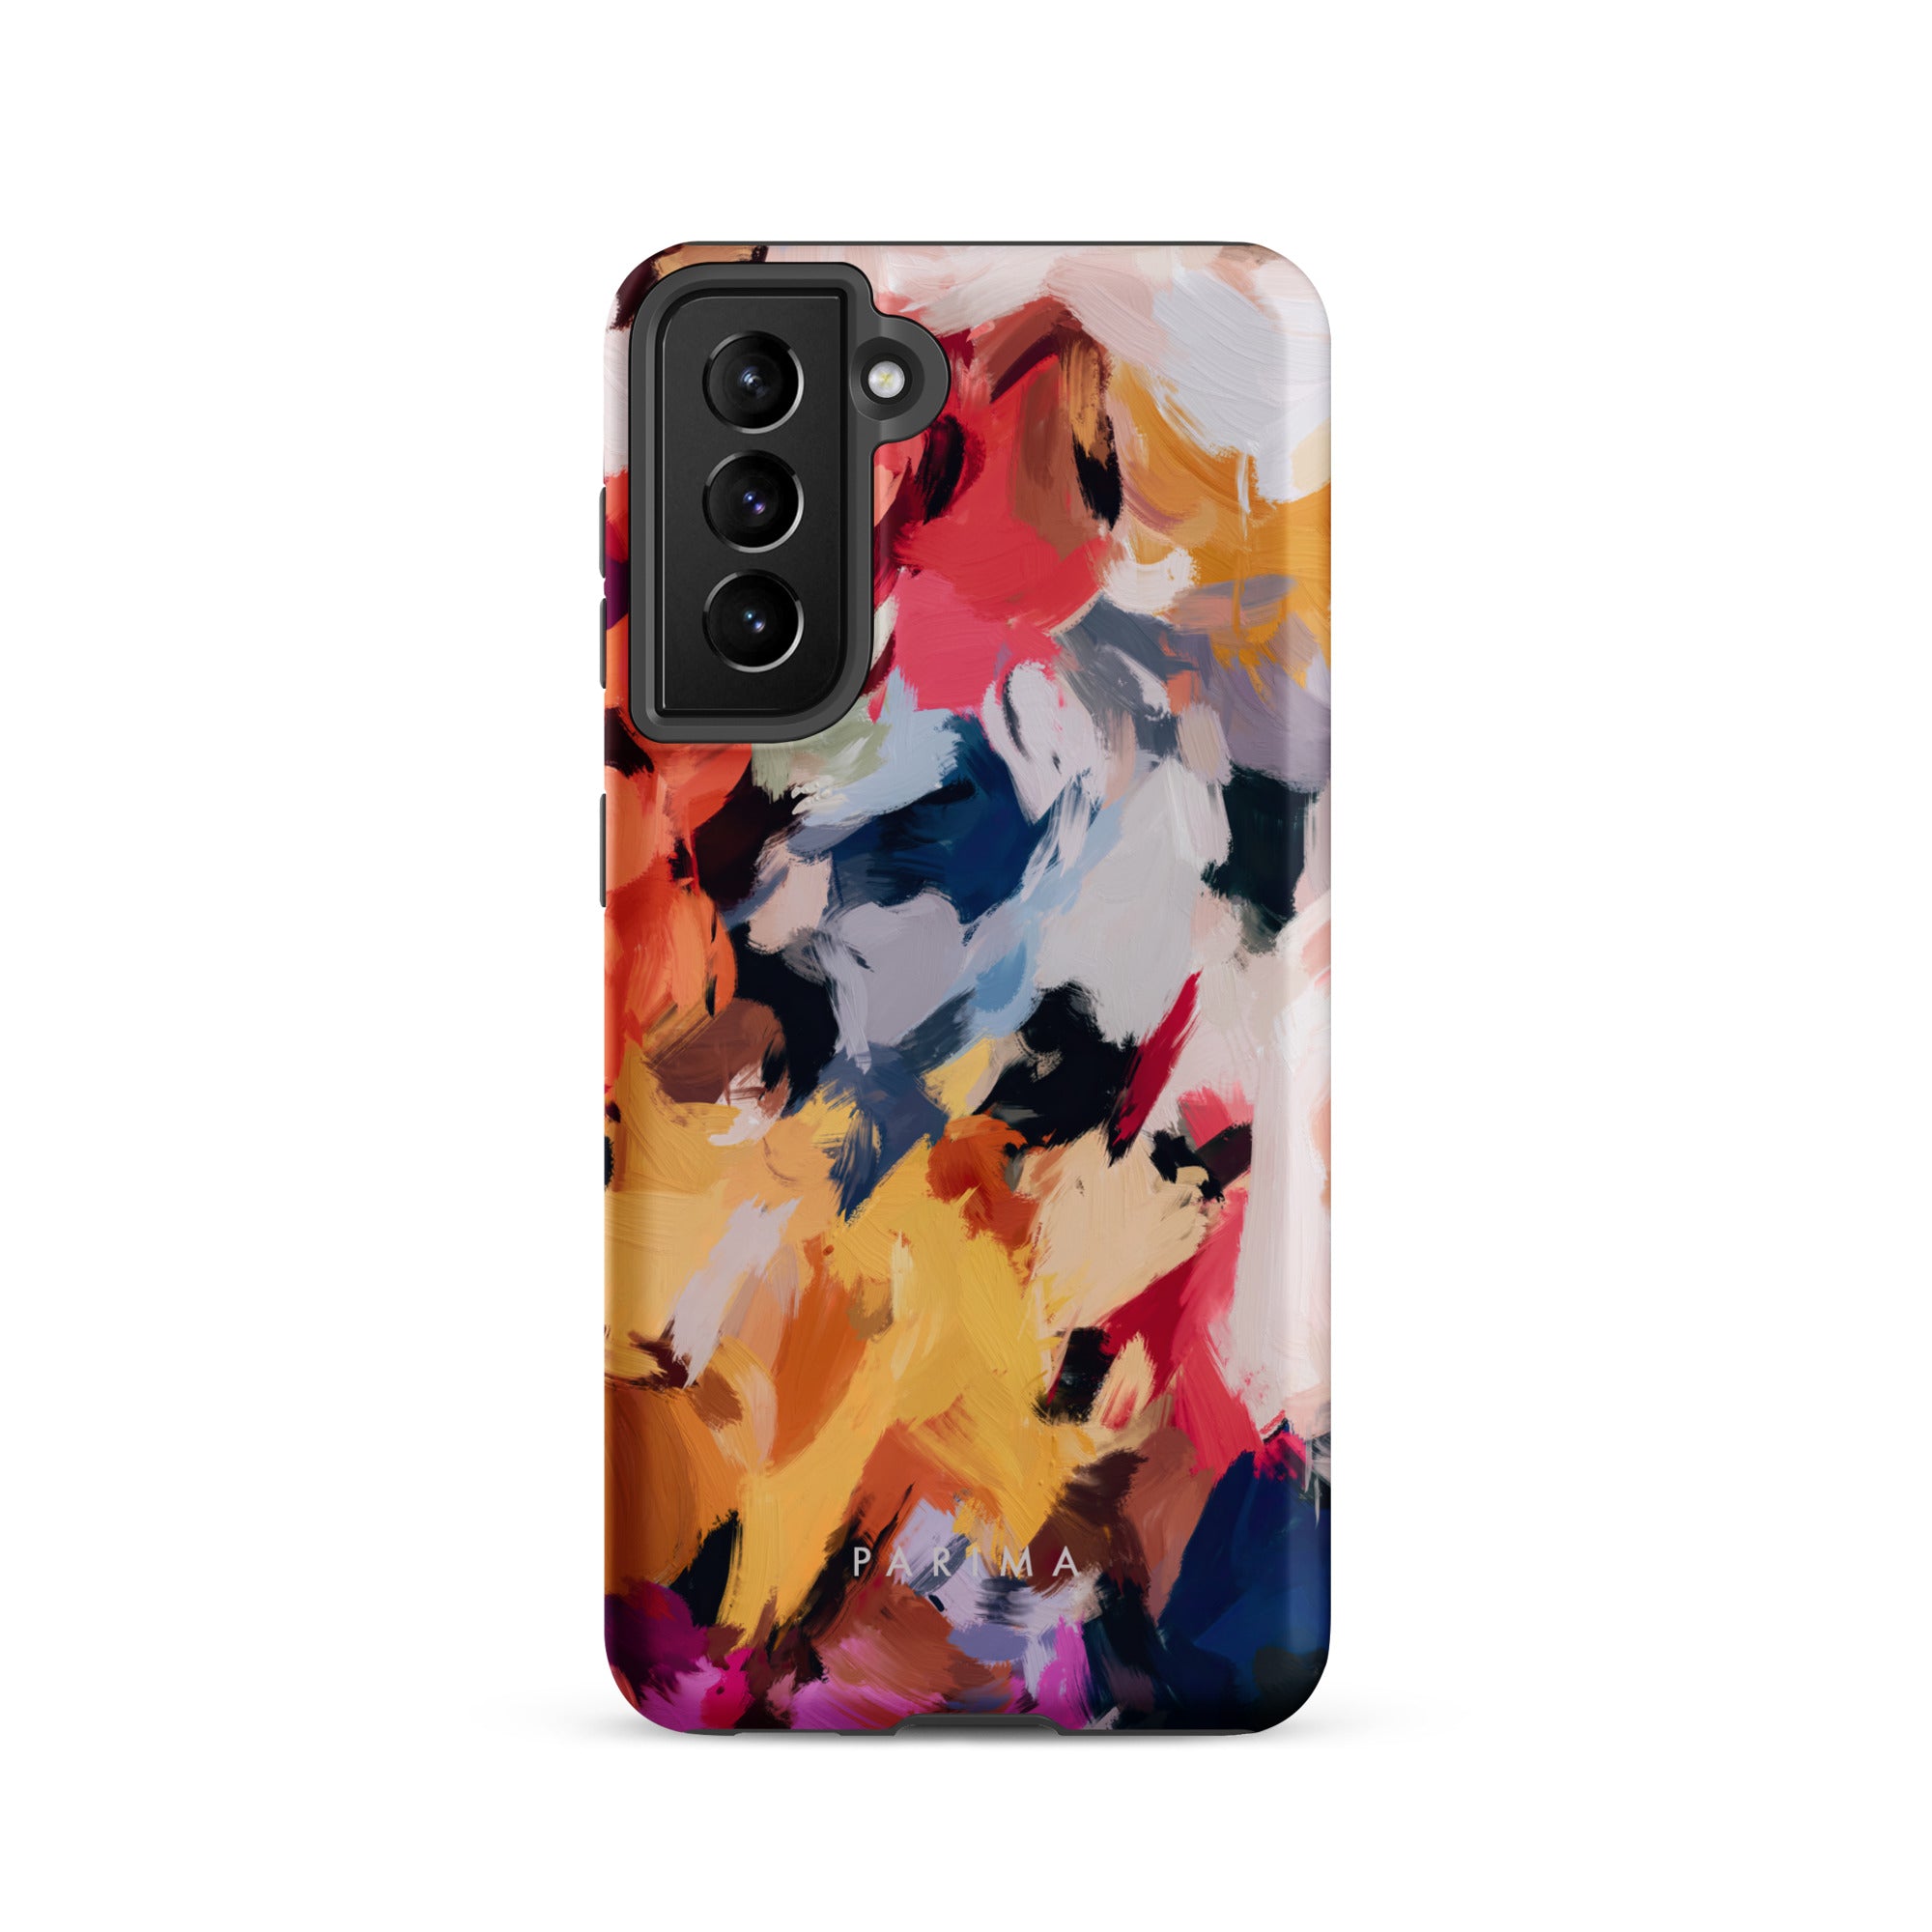 Wilde, blue and yellow multicolor abstract art on Samsung Galaxy S21 tough case by Parima Studio